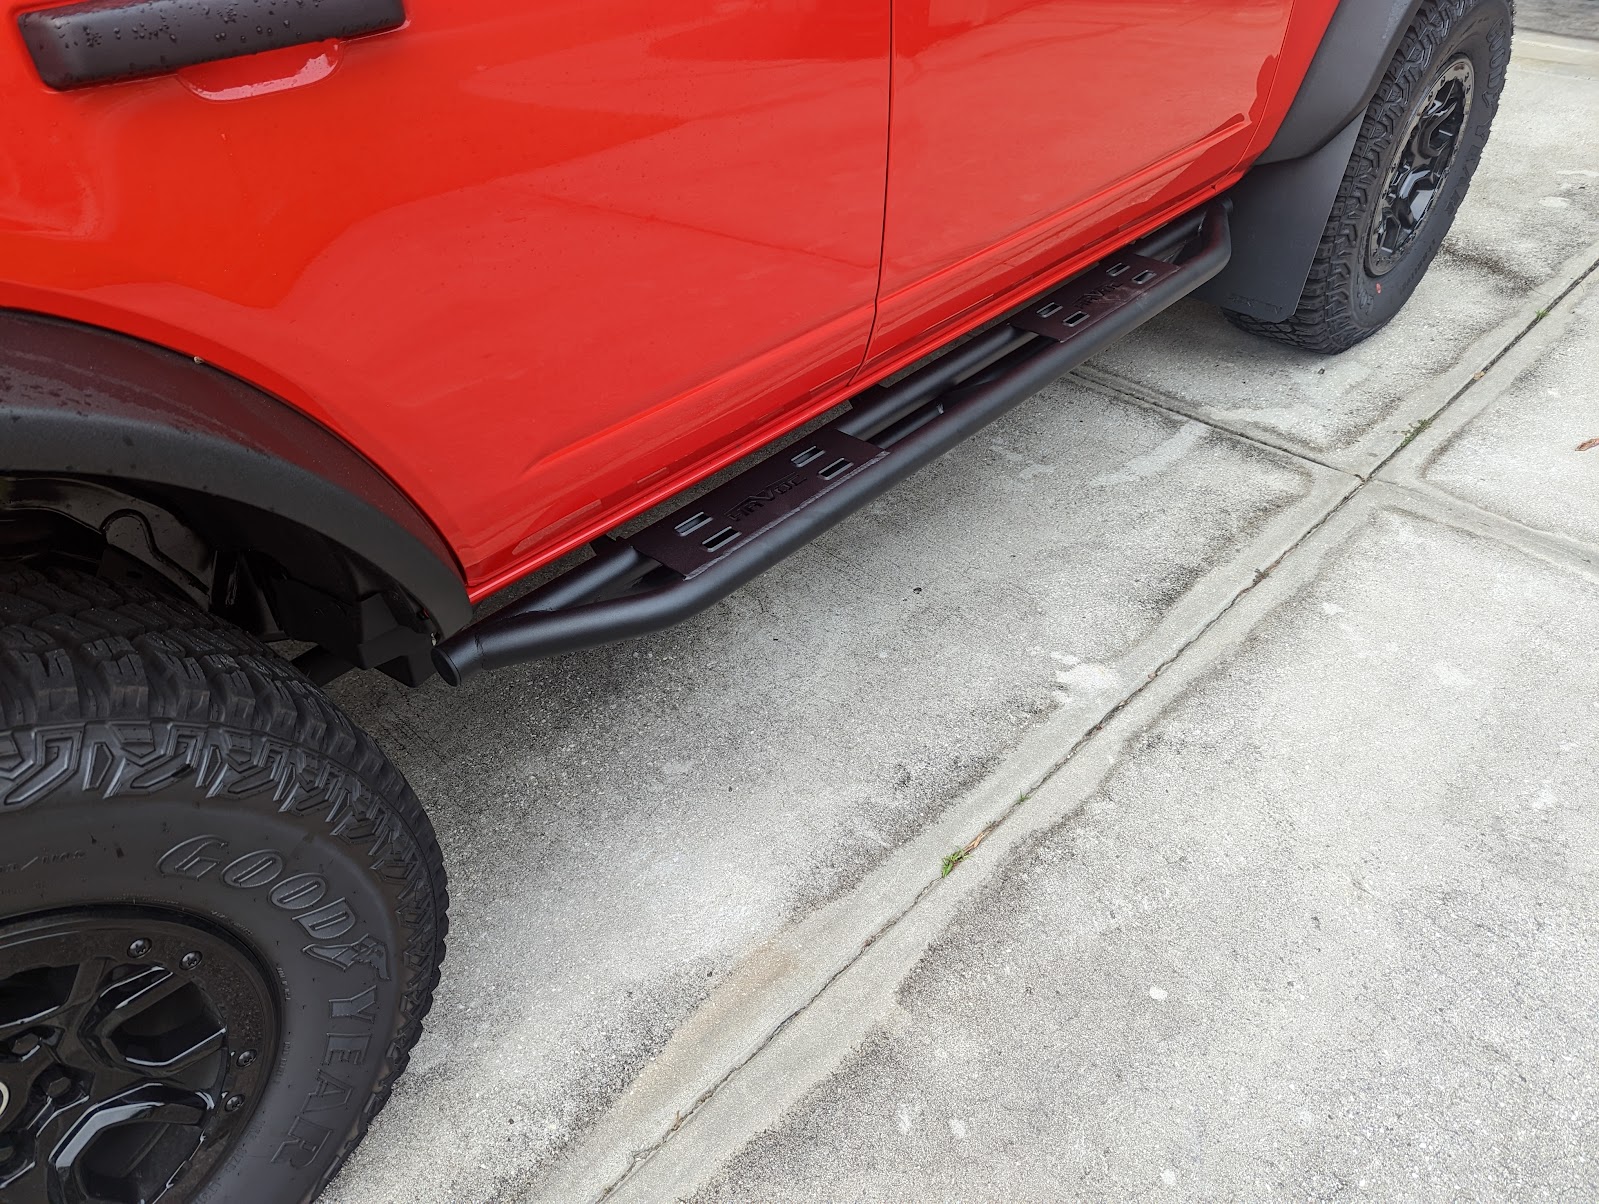 Ford Bronco Mudflap and side step combinations for 4-door? PXL_20221027_131001835